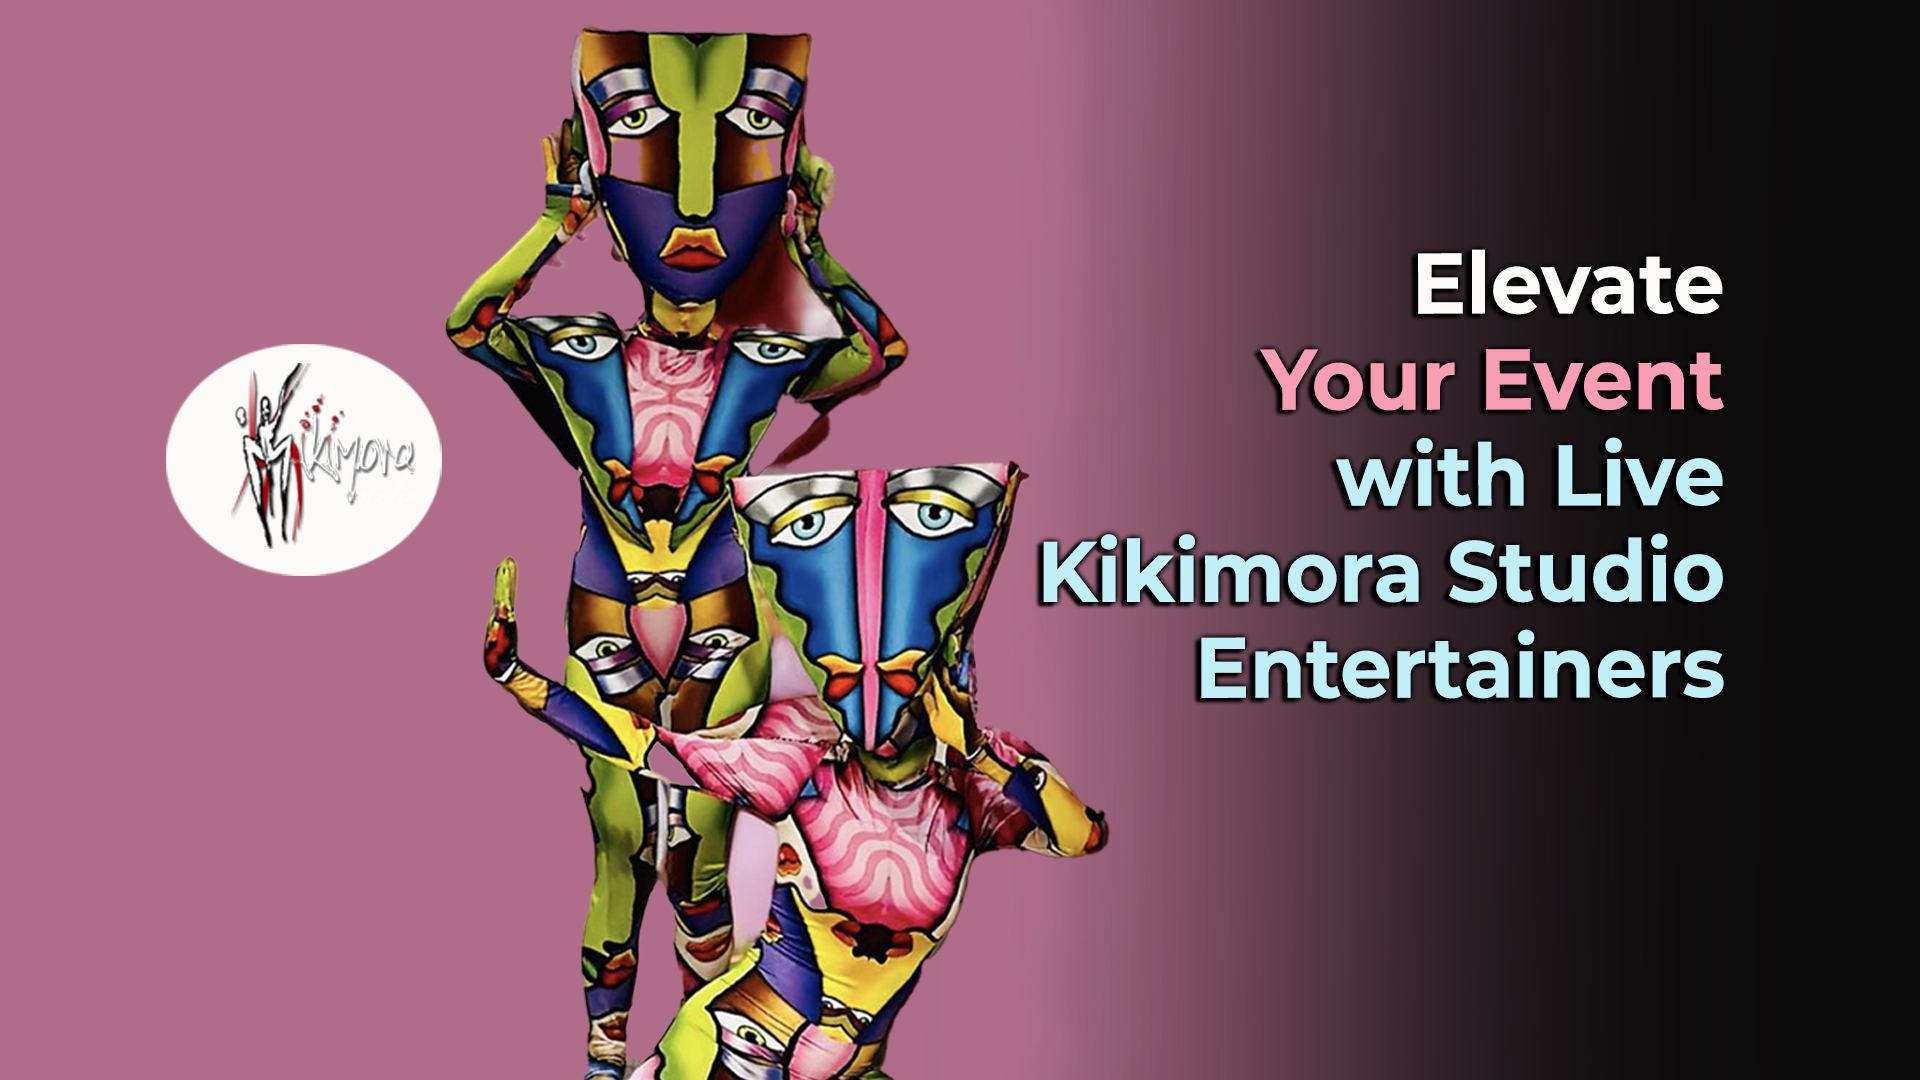 Elevate Your Event With Kikimora Studio’s Event Entertainers